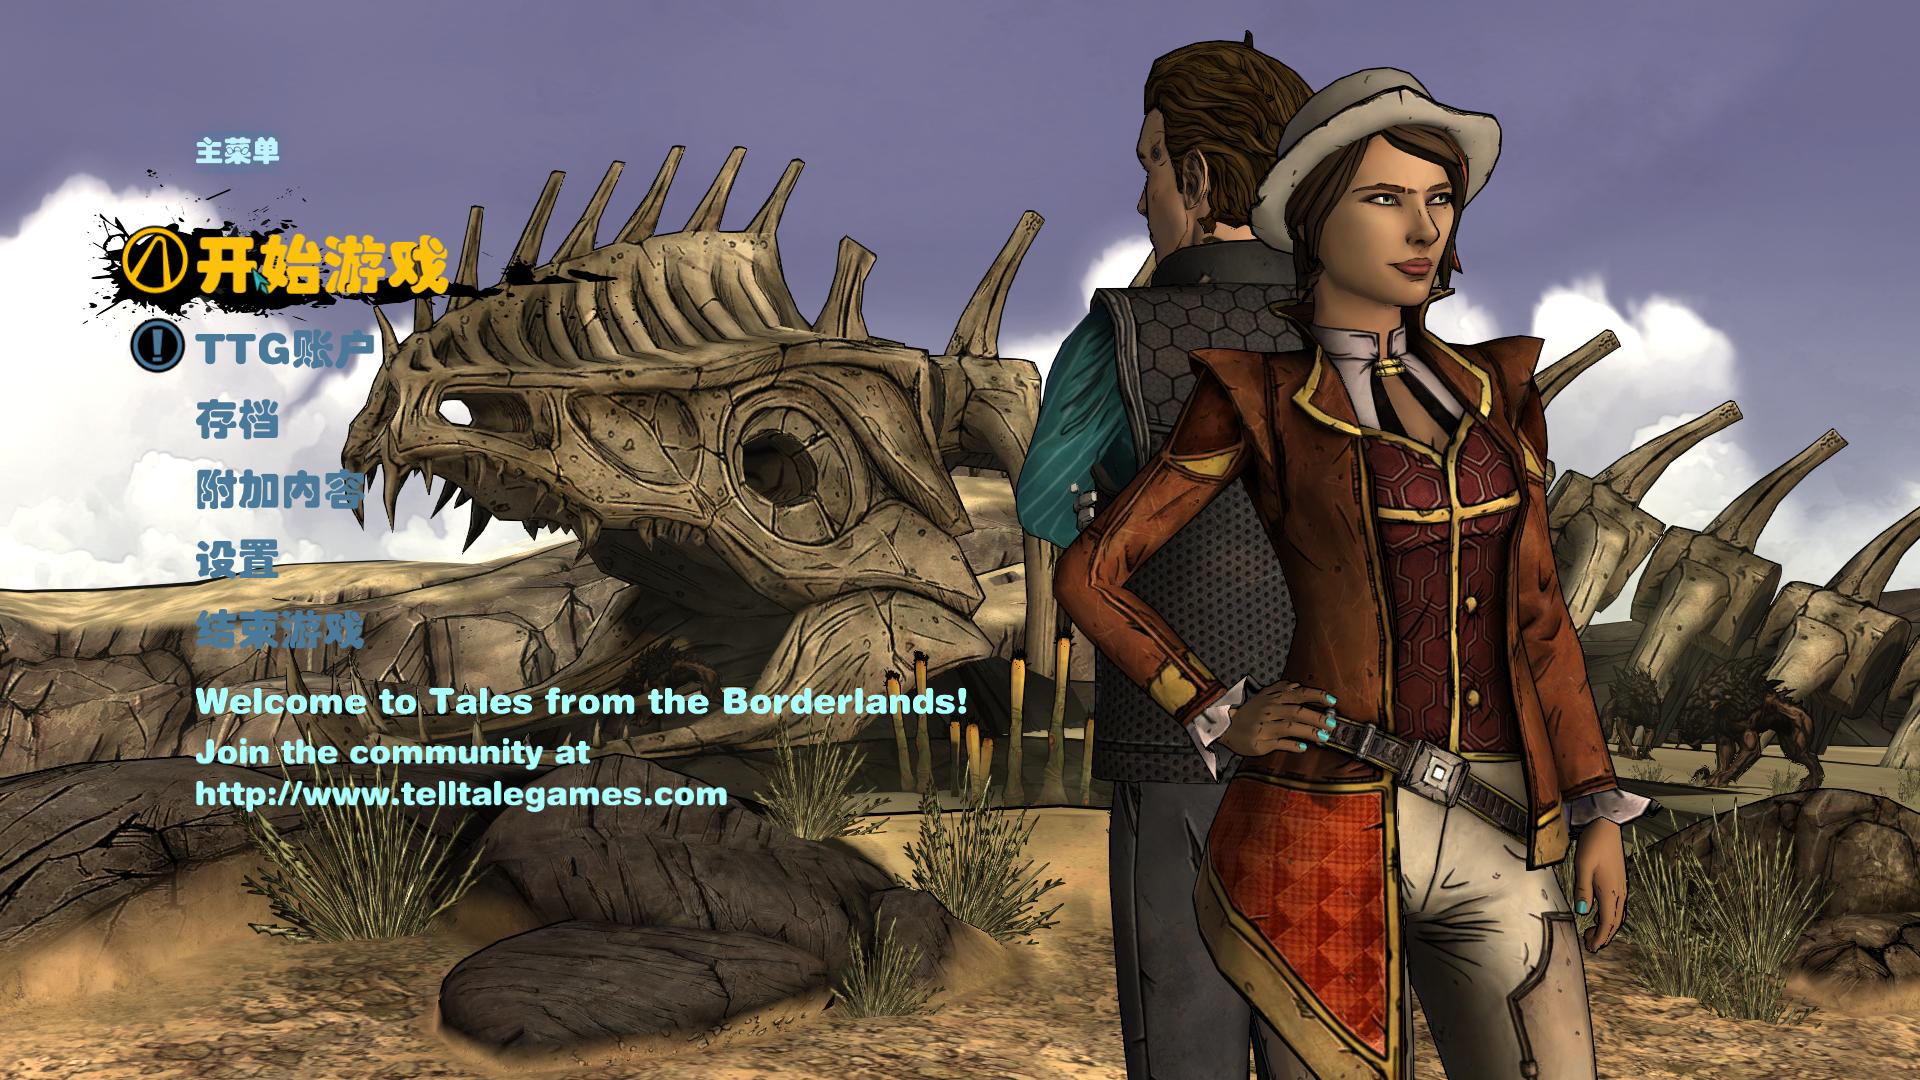 Tales from the far. Tales from the Borderlands: Episode 1-5. Borderlands from Telltale games. Tales from the Borderlands Скриншоты. Tales from the Borderlands: a Telltale games Series.